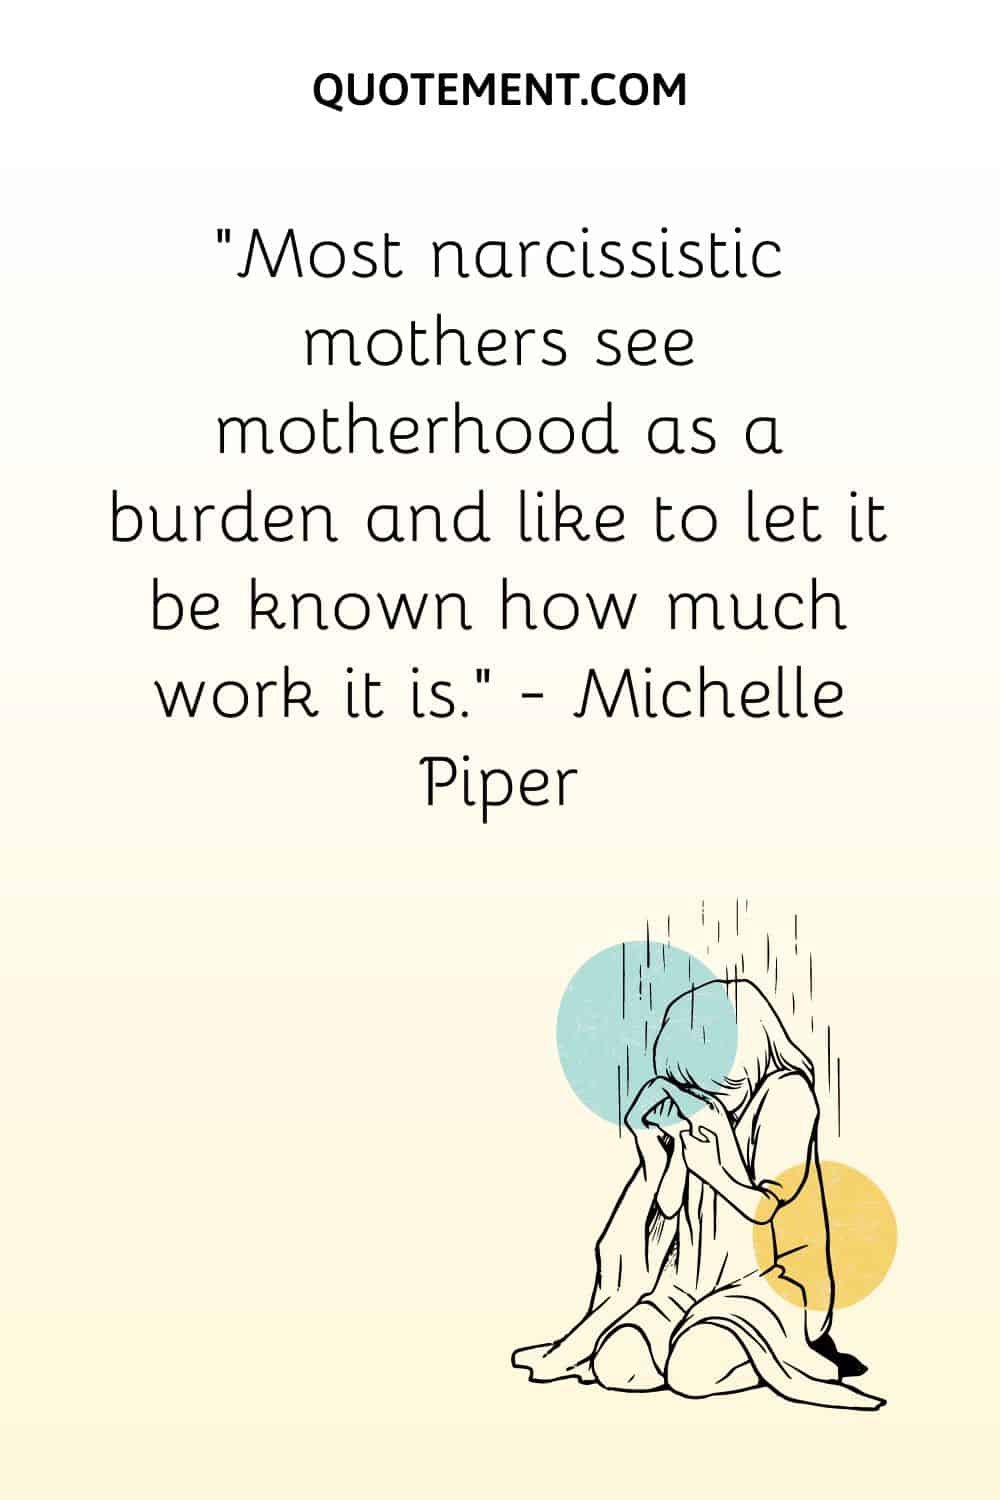 illustration of a kid crying representing toxic narcissistic mother quote